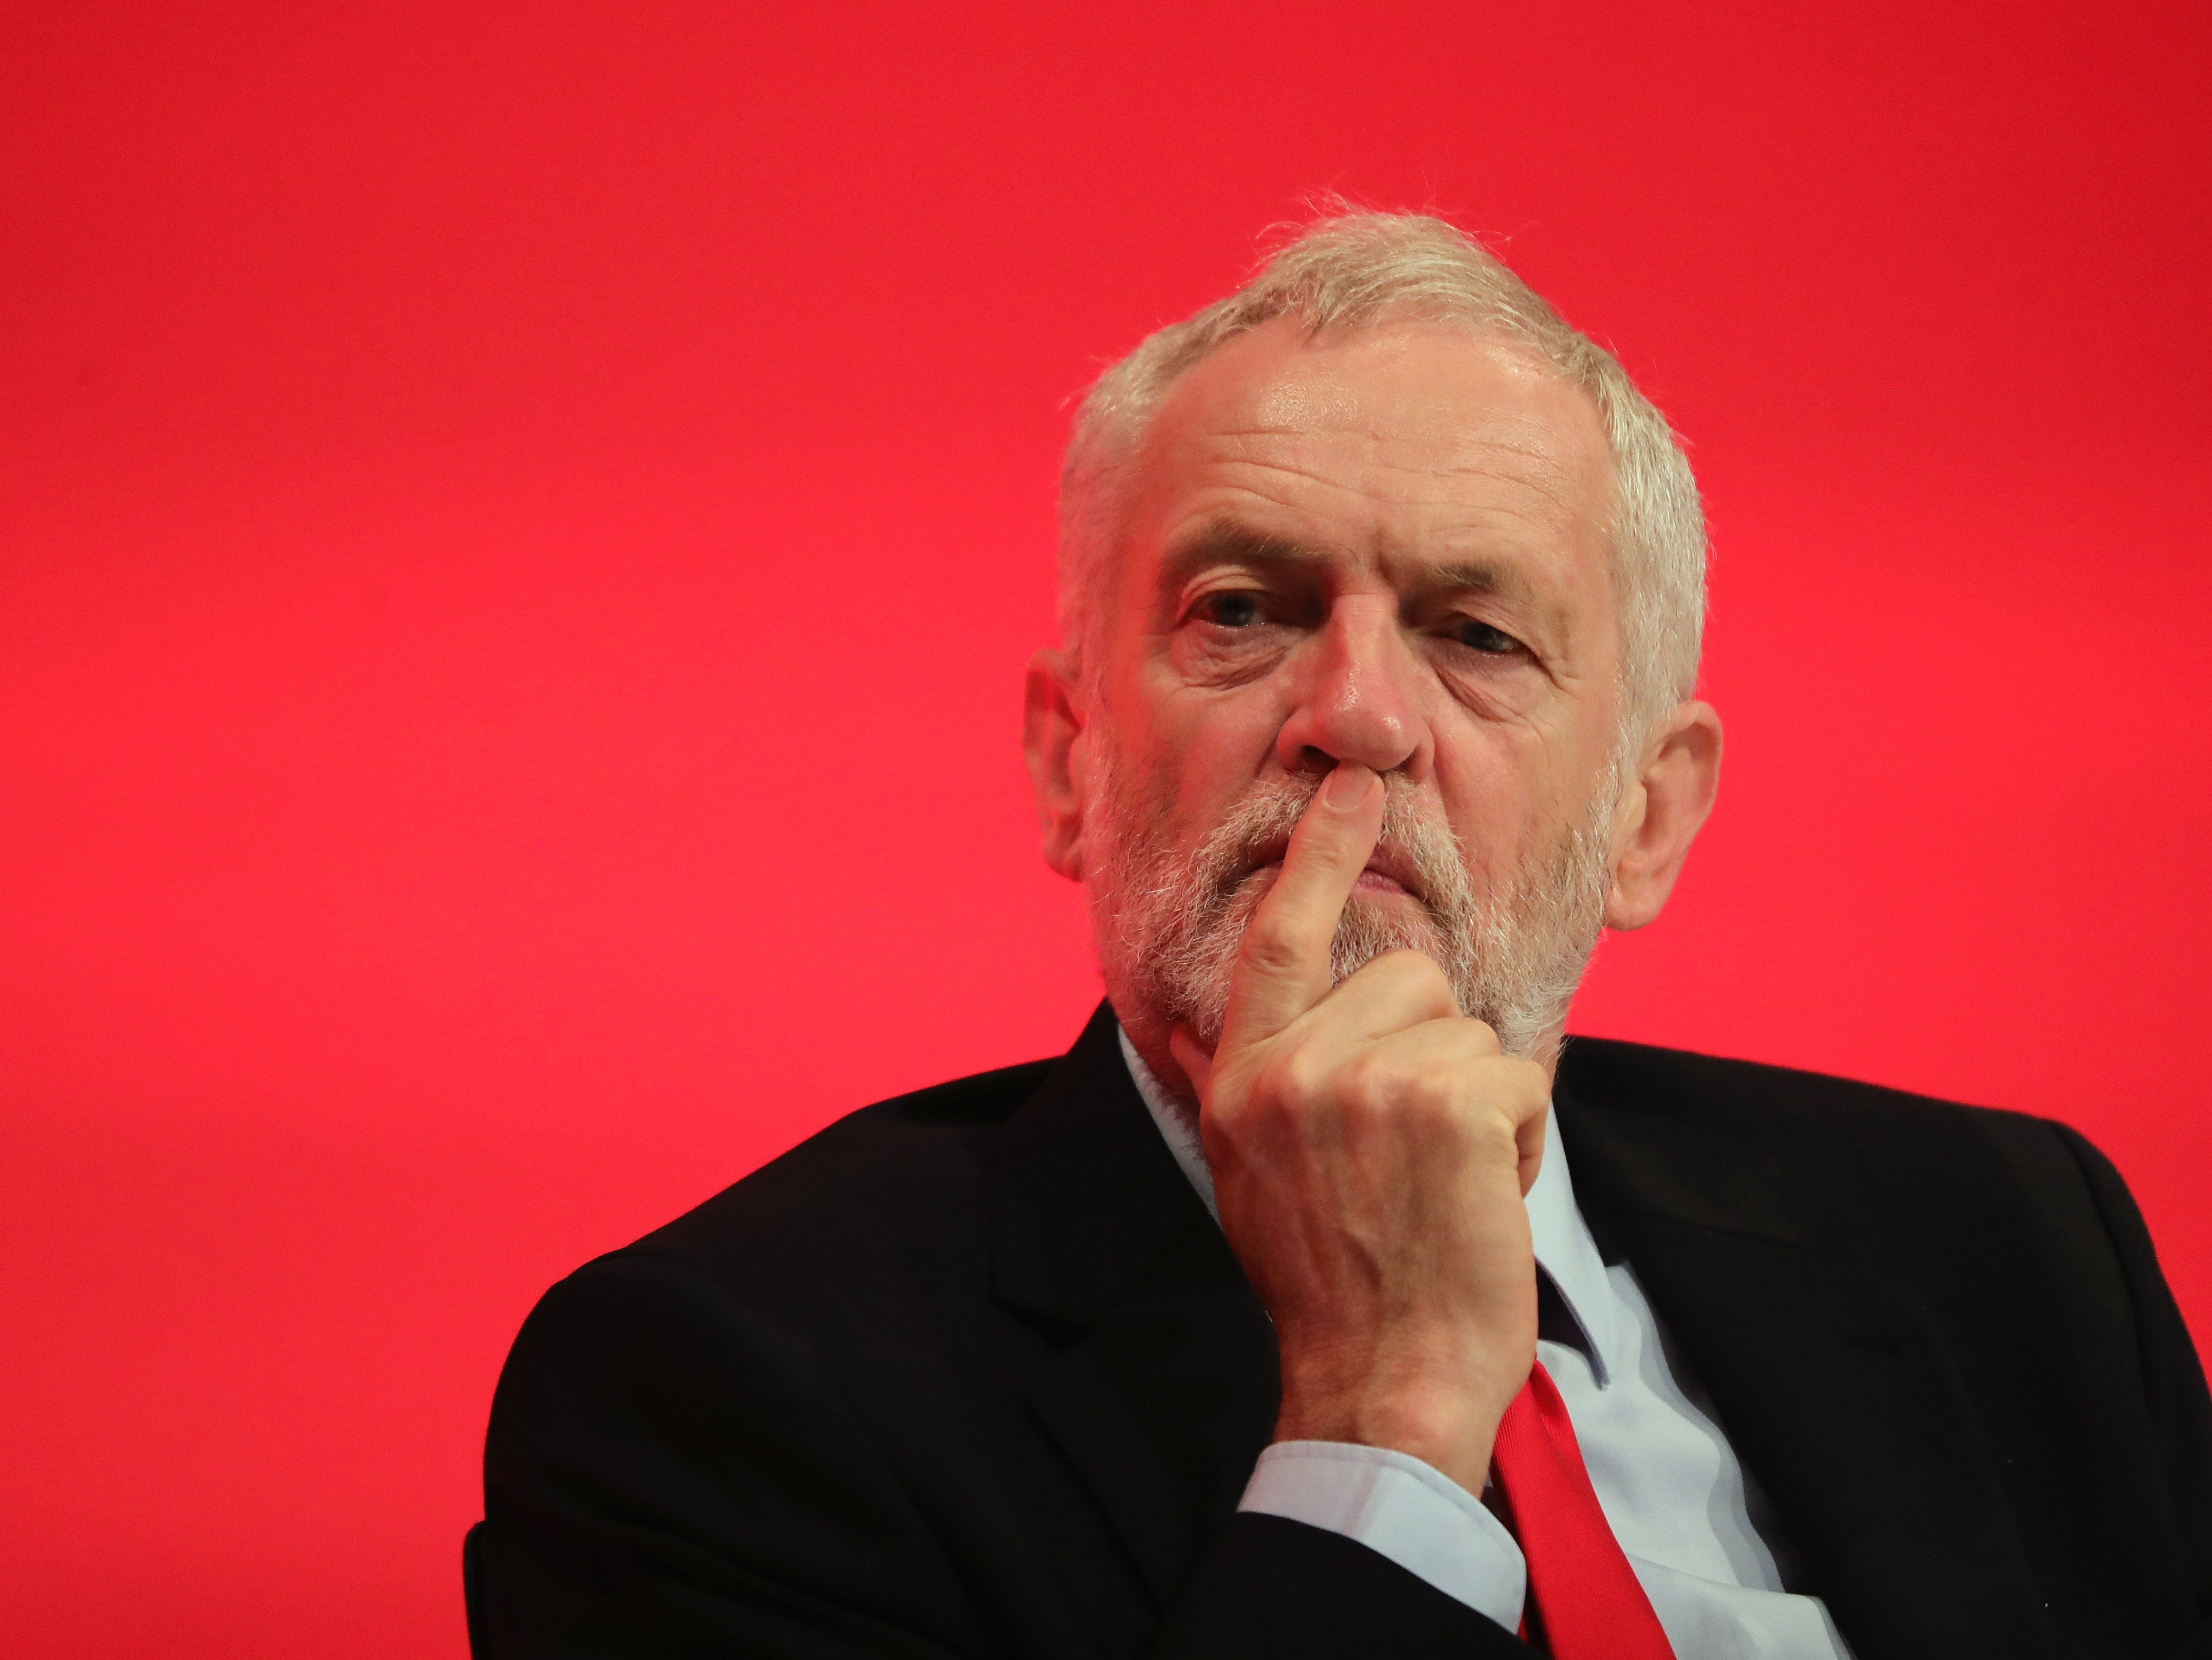 Seeing red: Corbyn’s treatment has riled the left